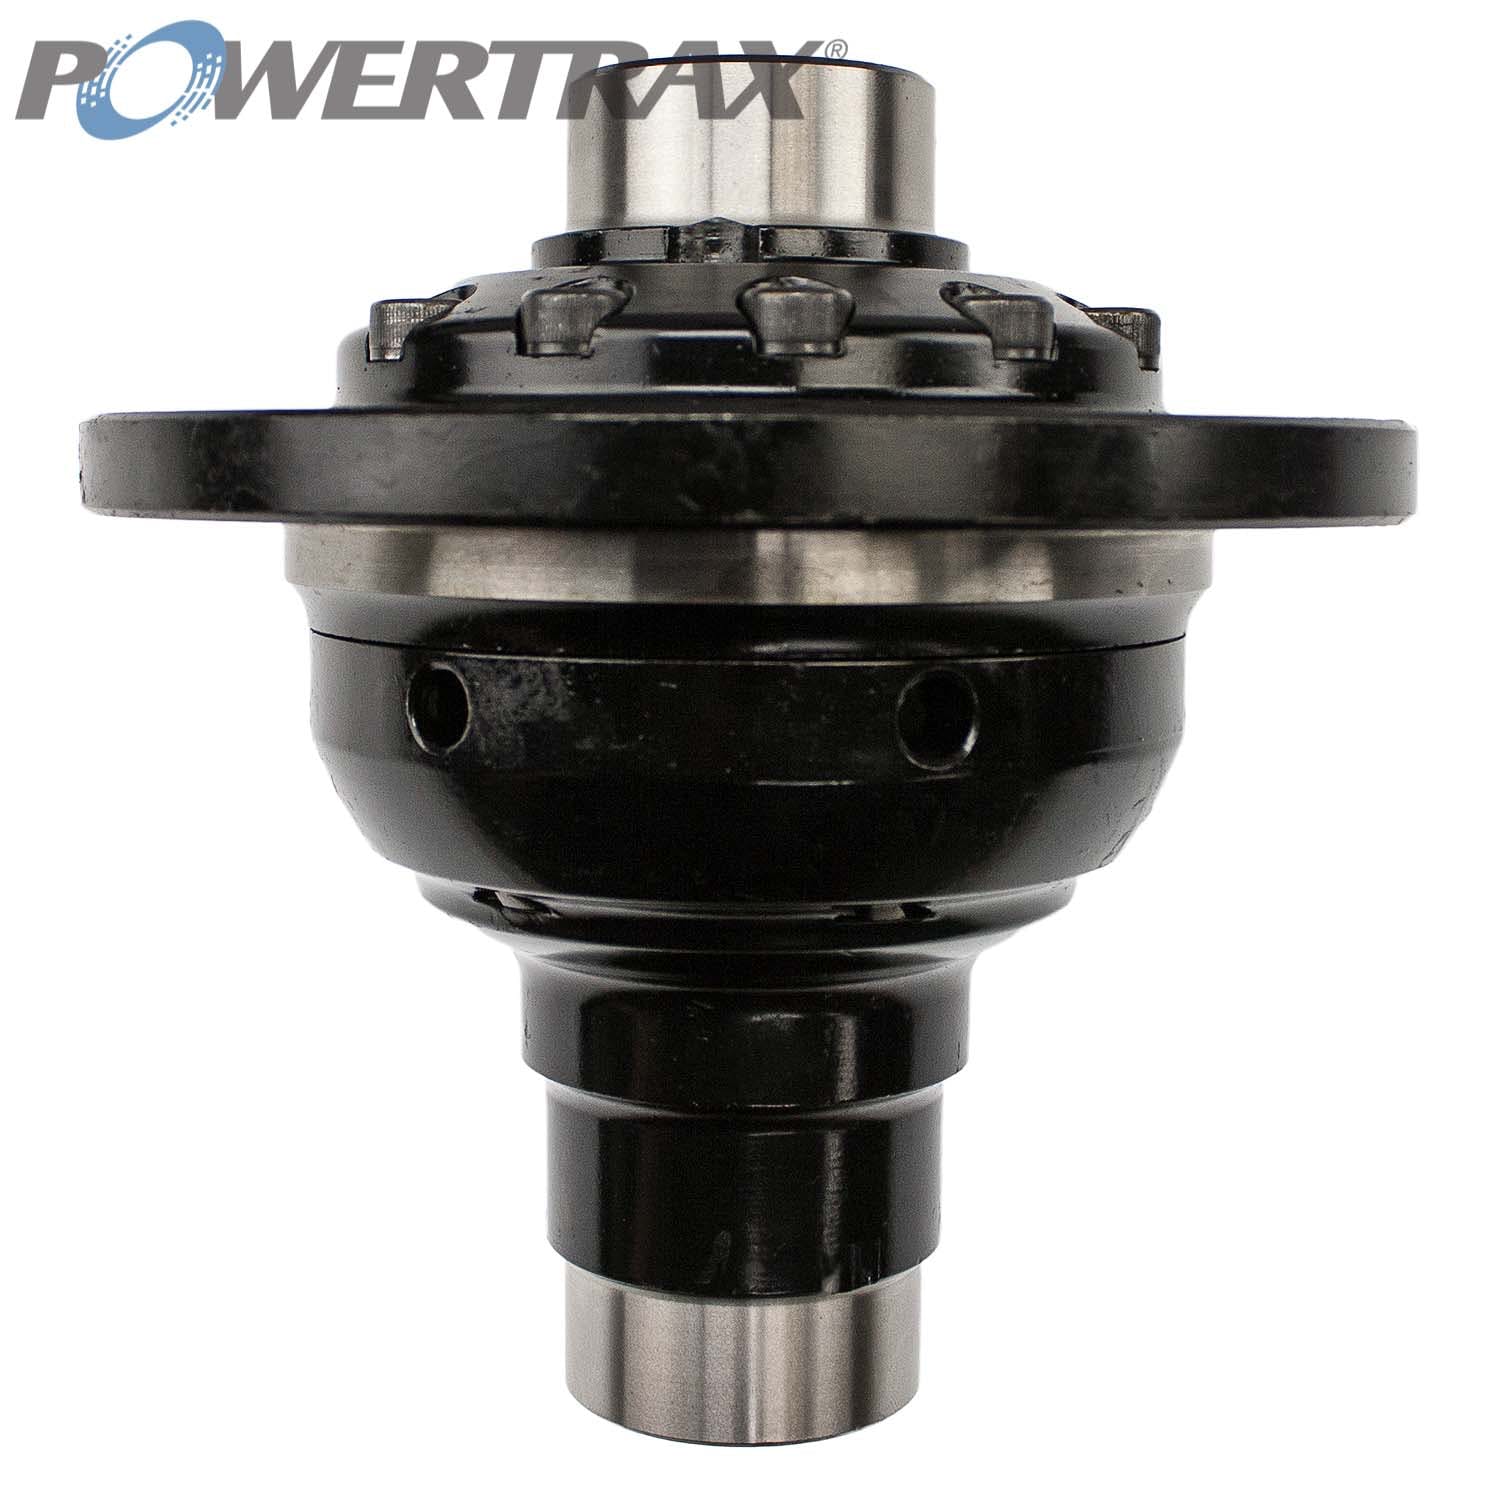 PowerTrax LK109035 Differential Lock Assembly